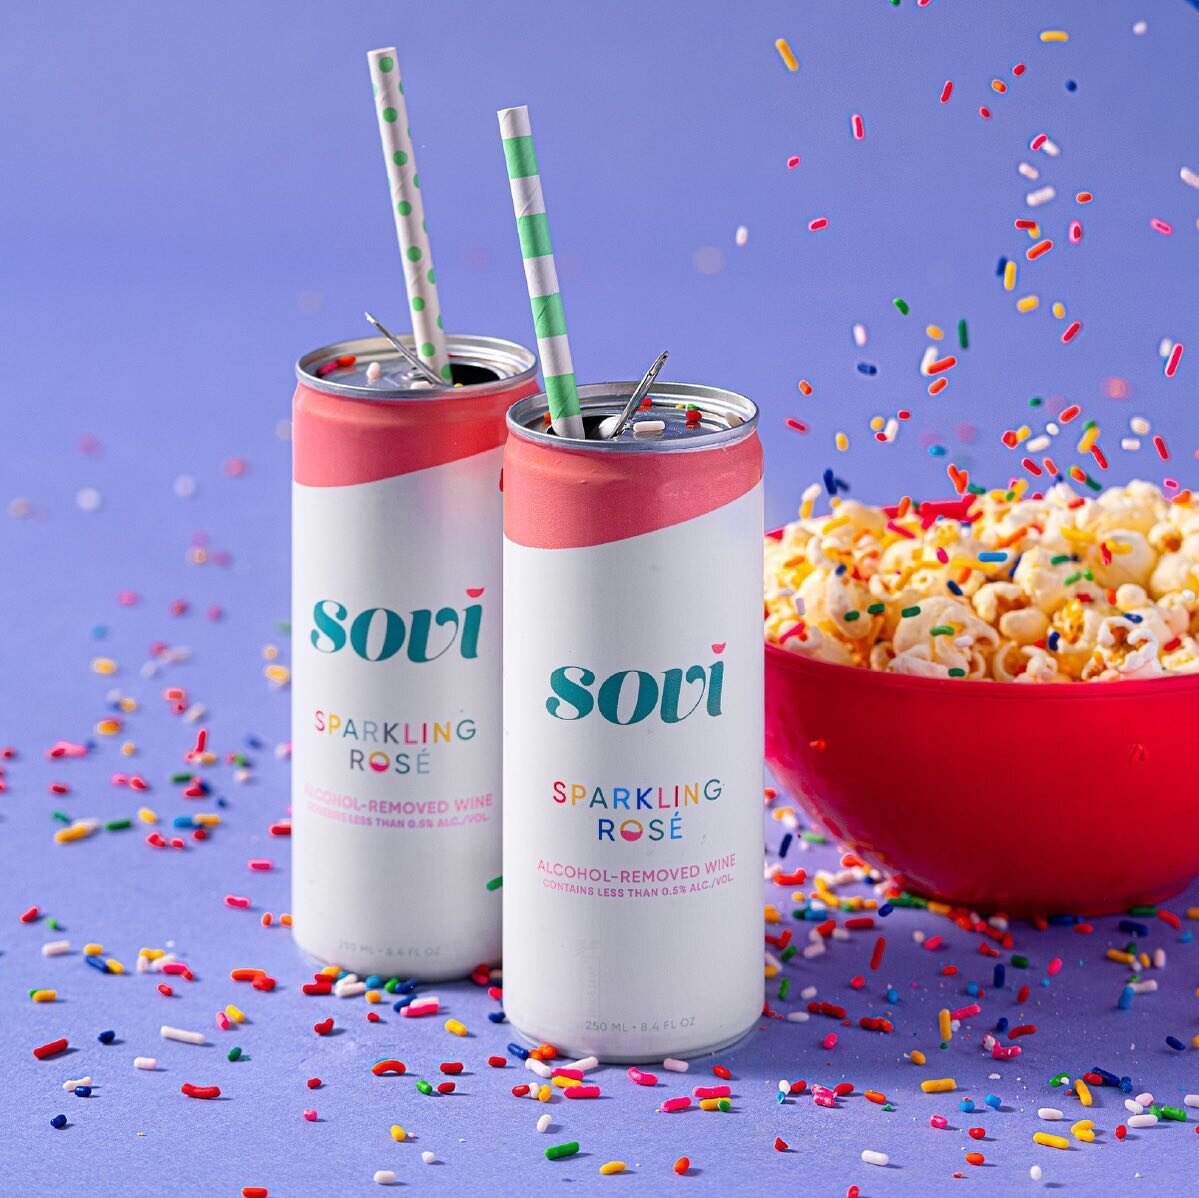 Some of the best days are days spent in the studio grabbing branded imagery for our clients. ⁠⁠
⁠⁠
On this shoot, @drinkSovi really raised the bar with all of the sprinkles and cheesy popcorn we got to pair with the leftover ros&eacute;!⁠⁠
⁠⁠
.⁠⁠
.⁠⁠